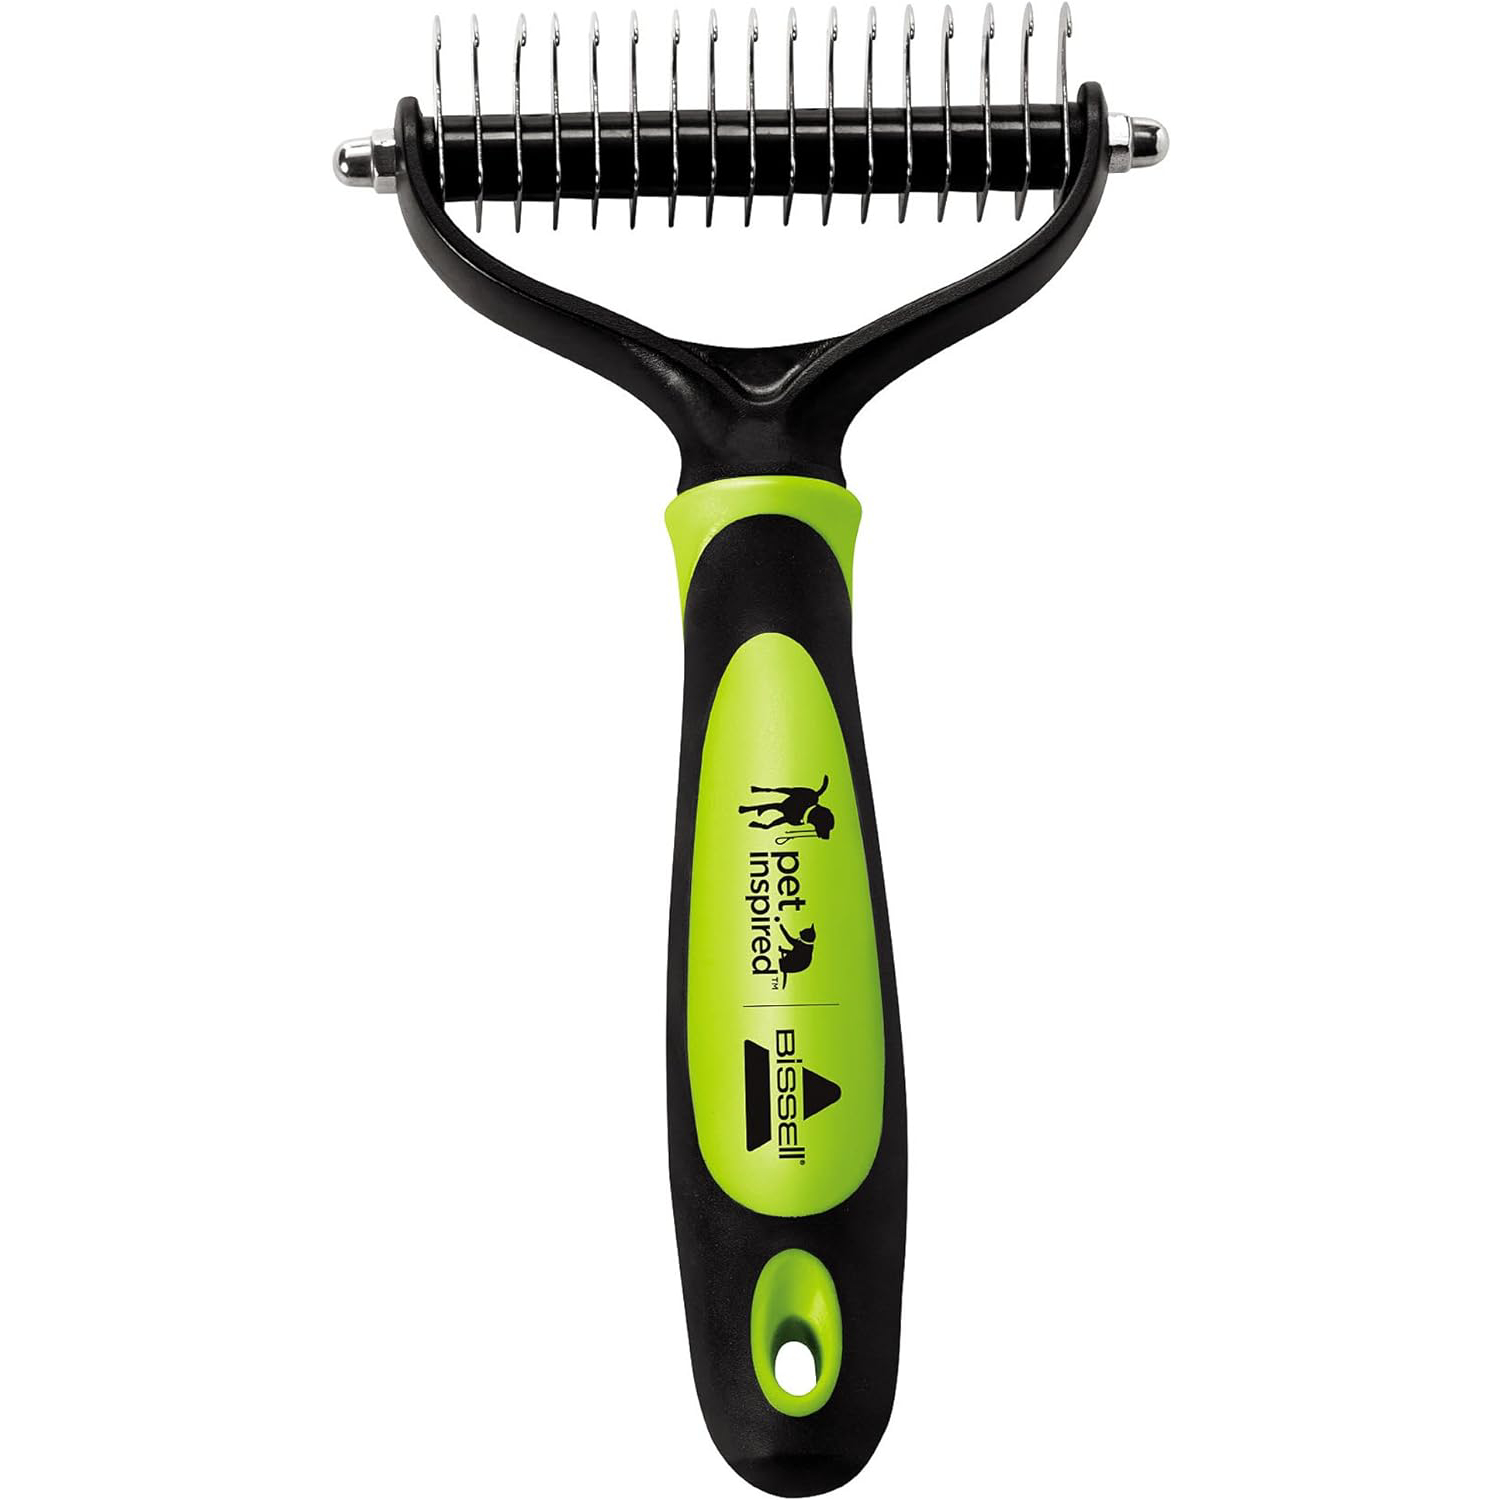 BISSELL FURGET IT Cat and Dog Grooming Brush with Shedding and Dematting, 2064A Green New (1)